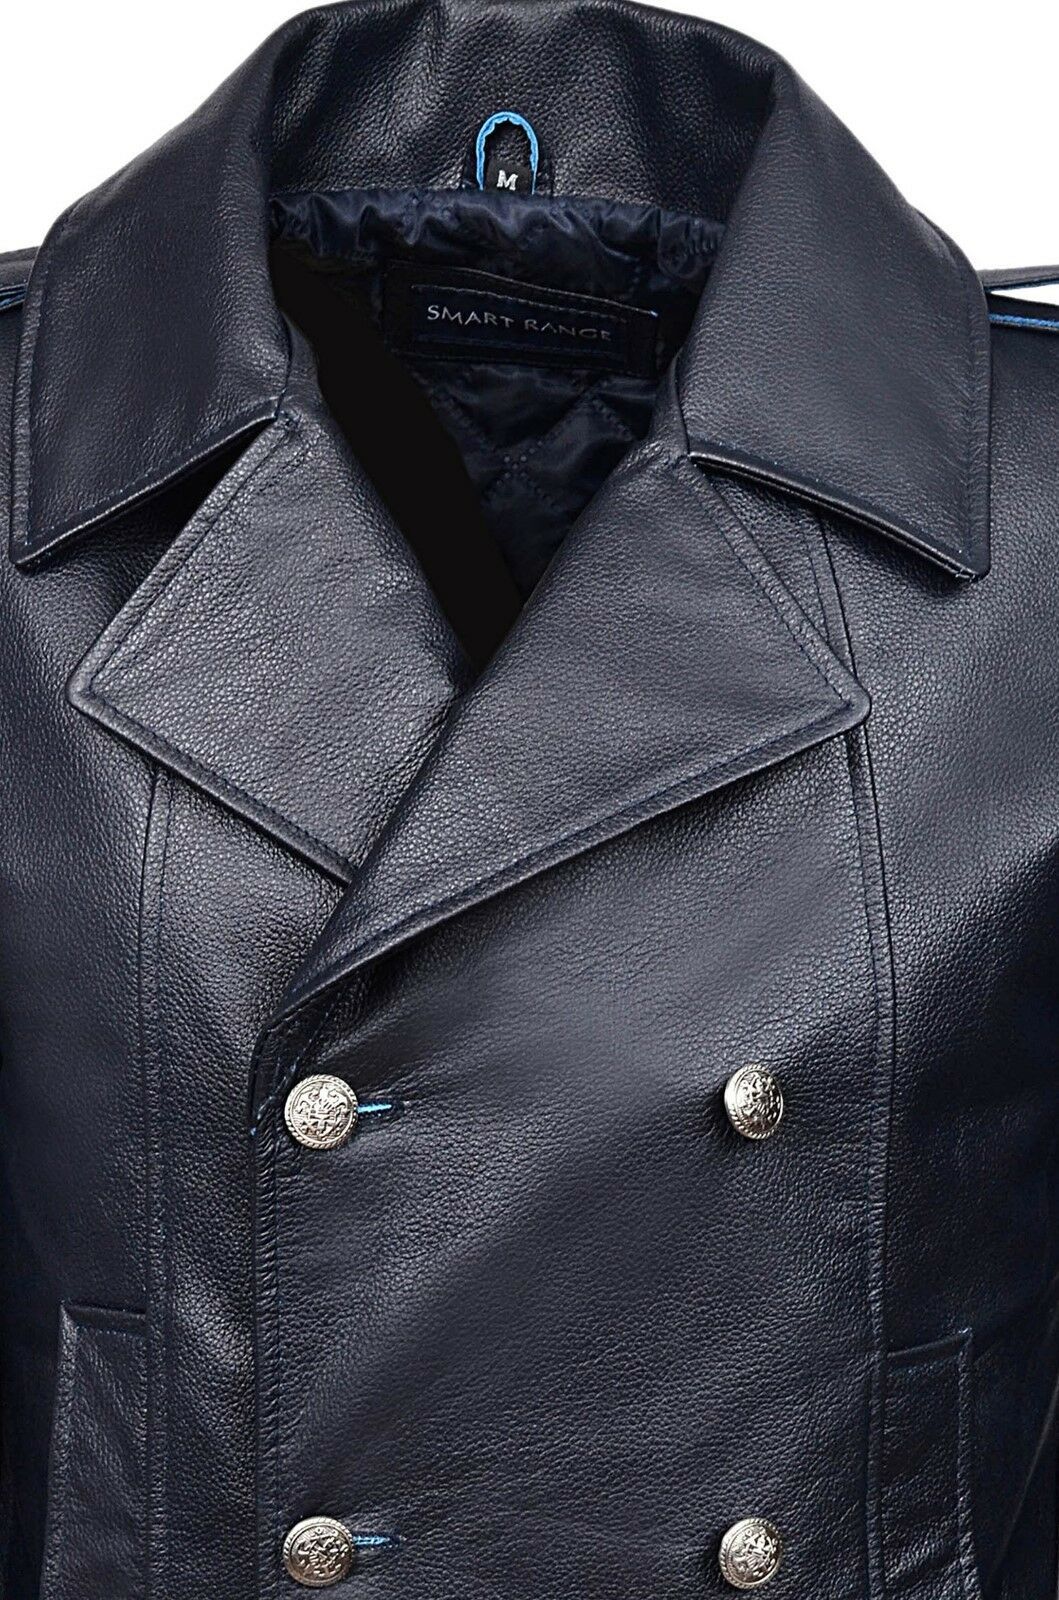 Classic German Naval Military Pea Coat Navy Blue Cowhide Leather Jacket - Luxurena Leather